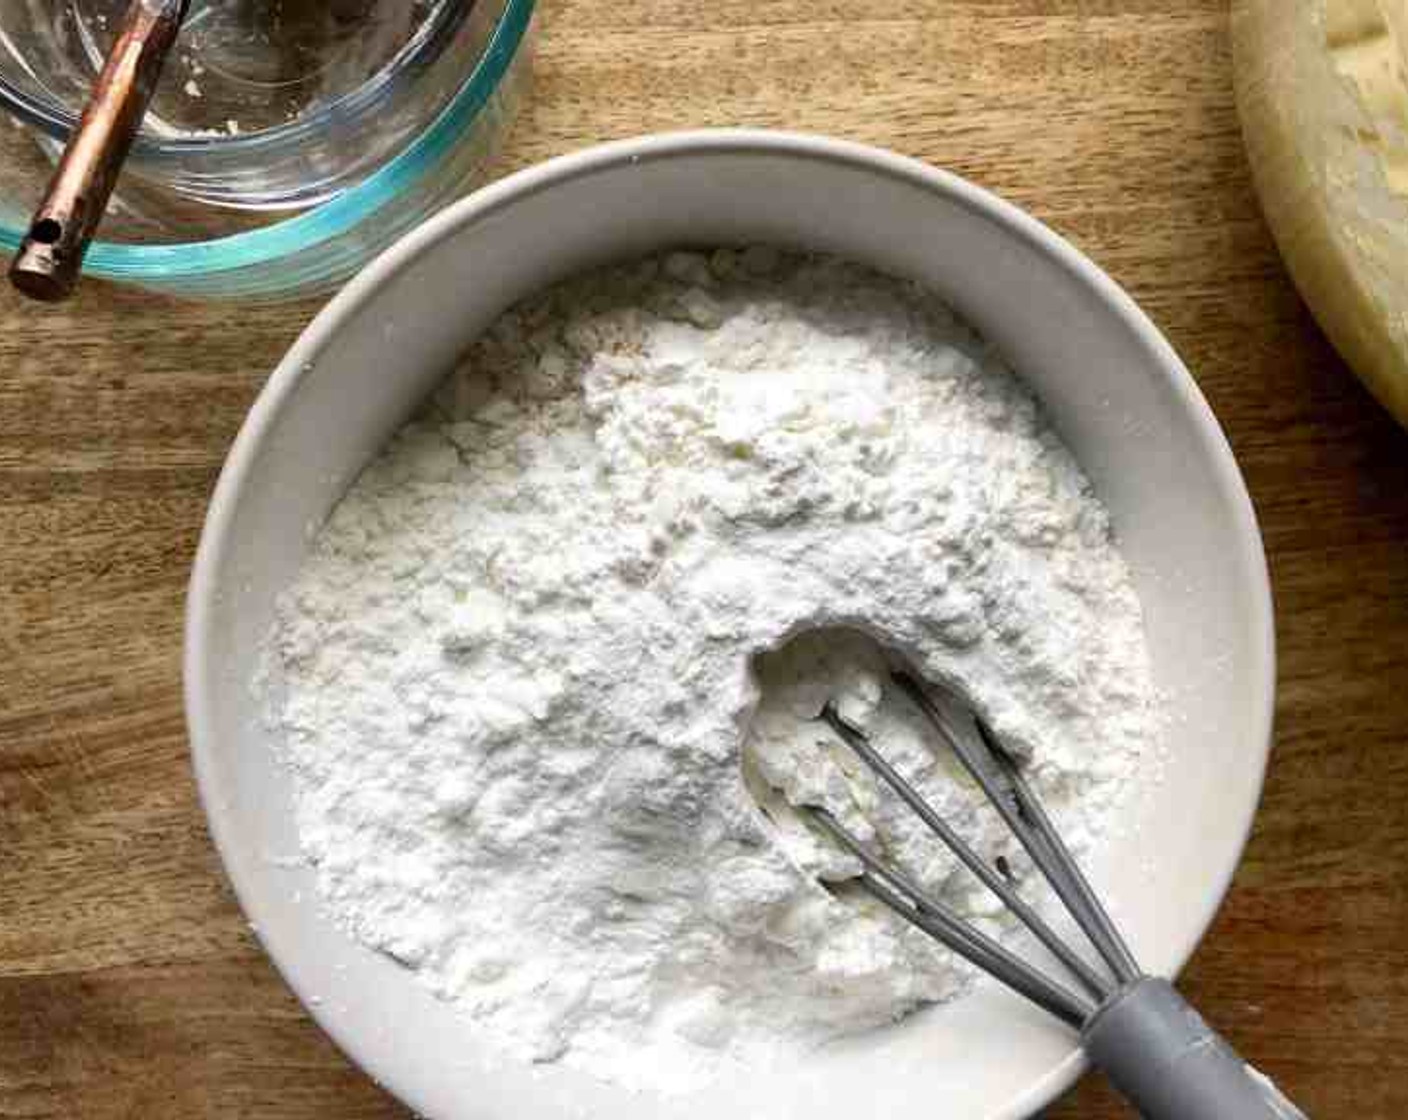 step 6 In a separate bowl, whisk together the All-Purpose Flour (1 1/4 cups), Corn Starch (2/3 cup), and Baking Powder (1/2 Tbsp).